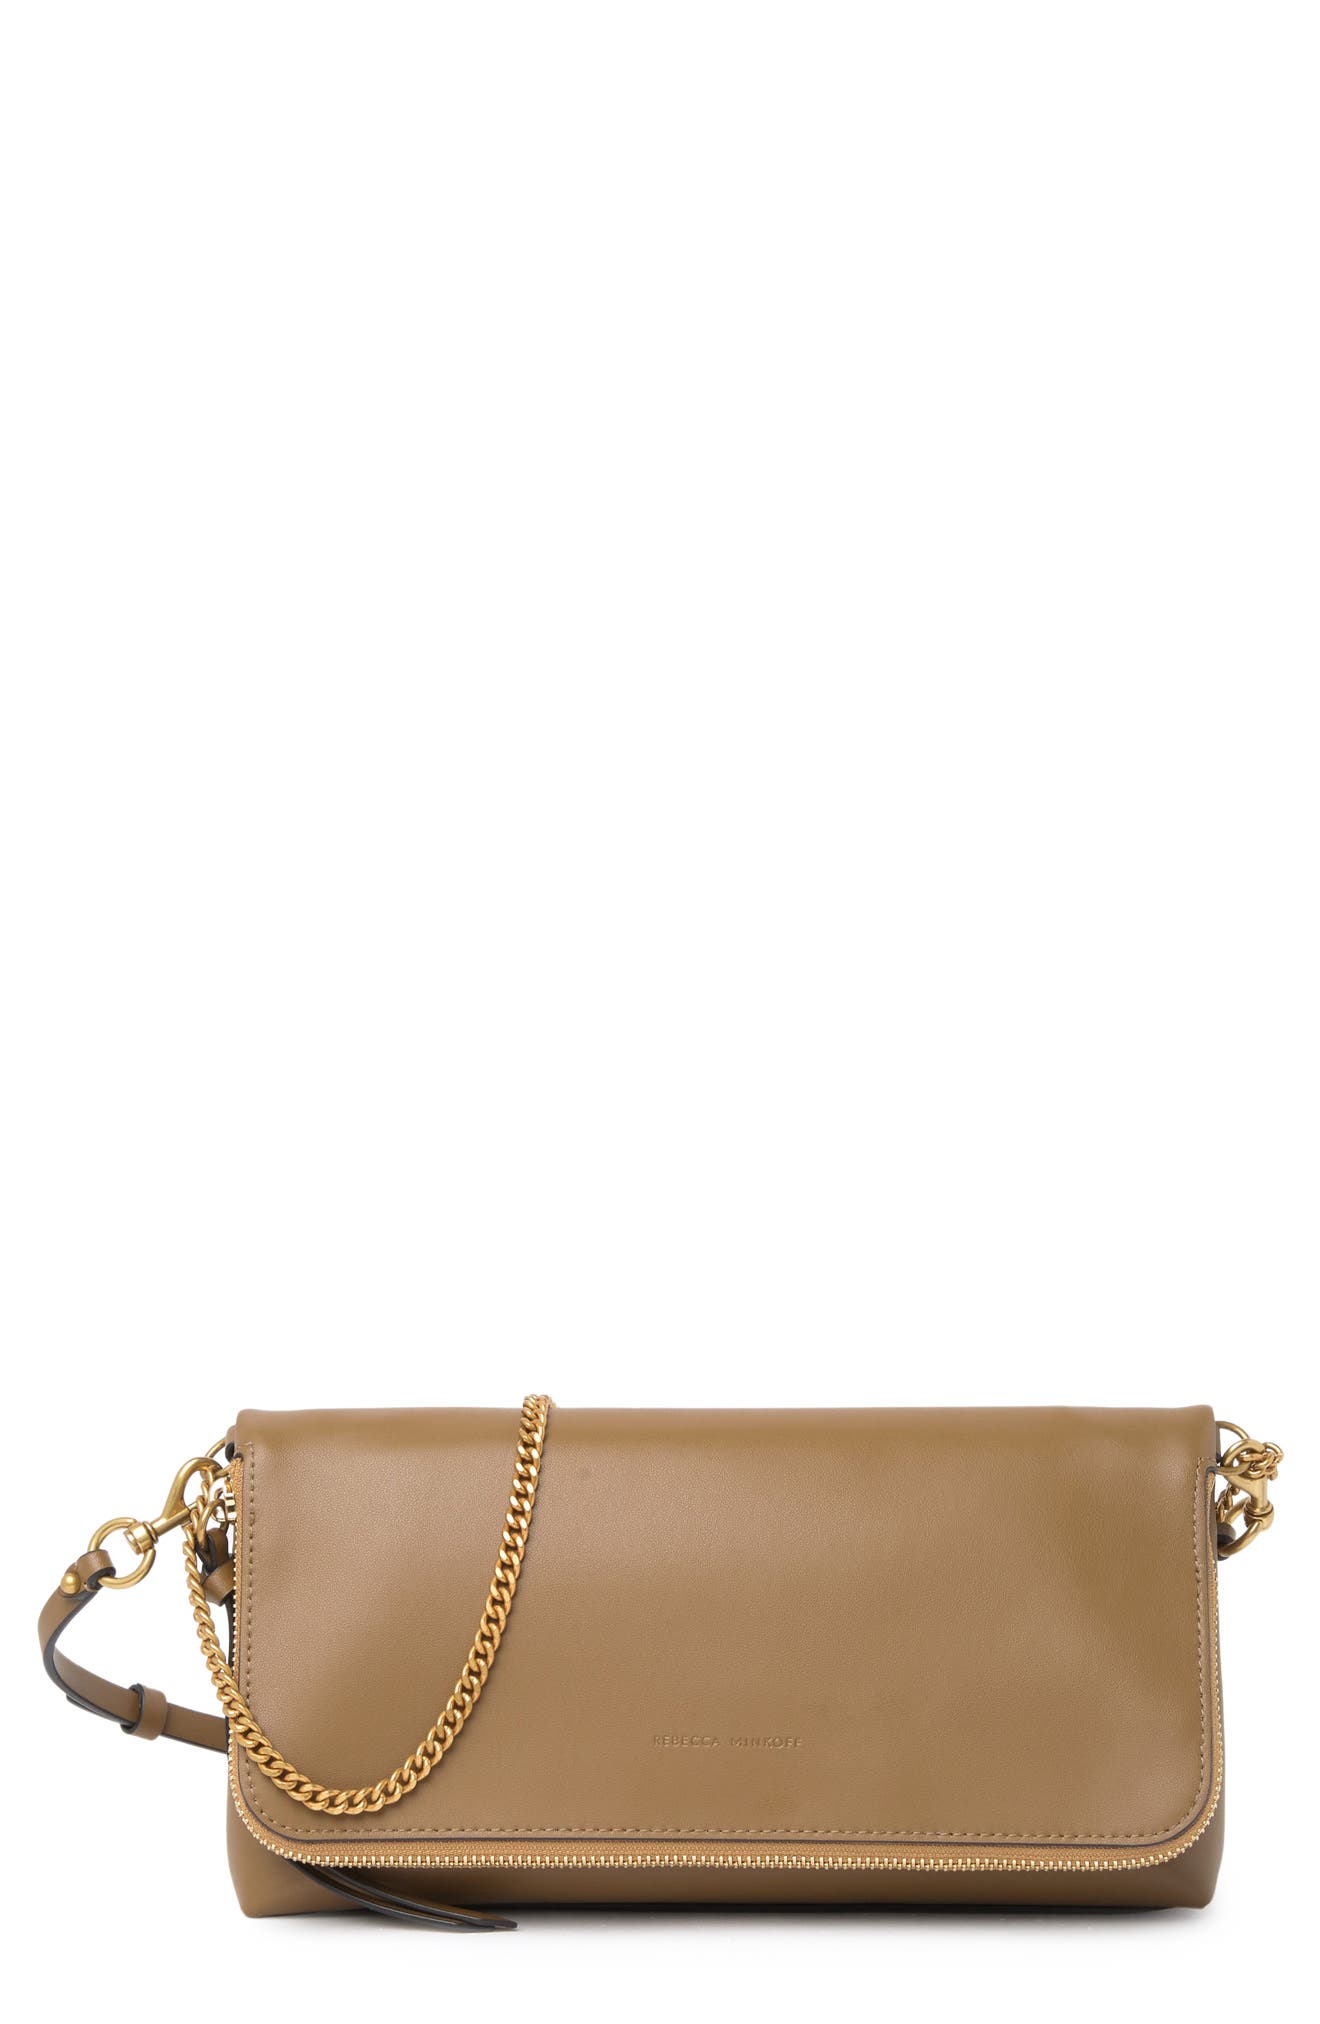 Rebecca Minkoff Date Convertible Leather Crossbody in Military at Nordstrom